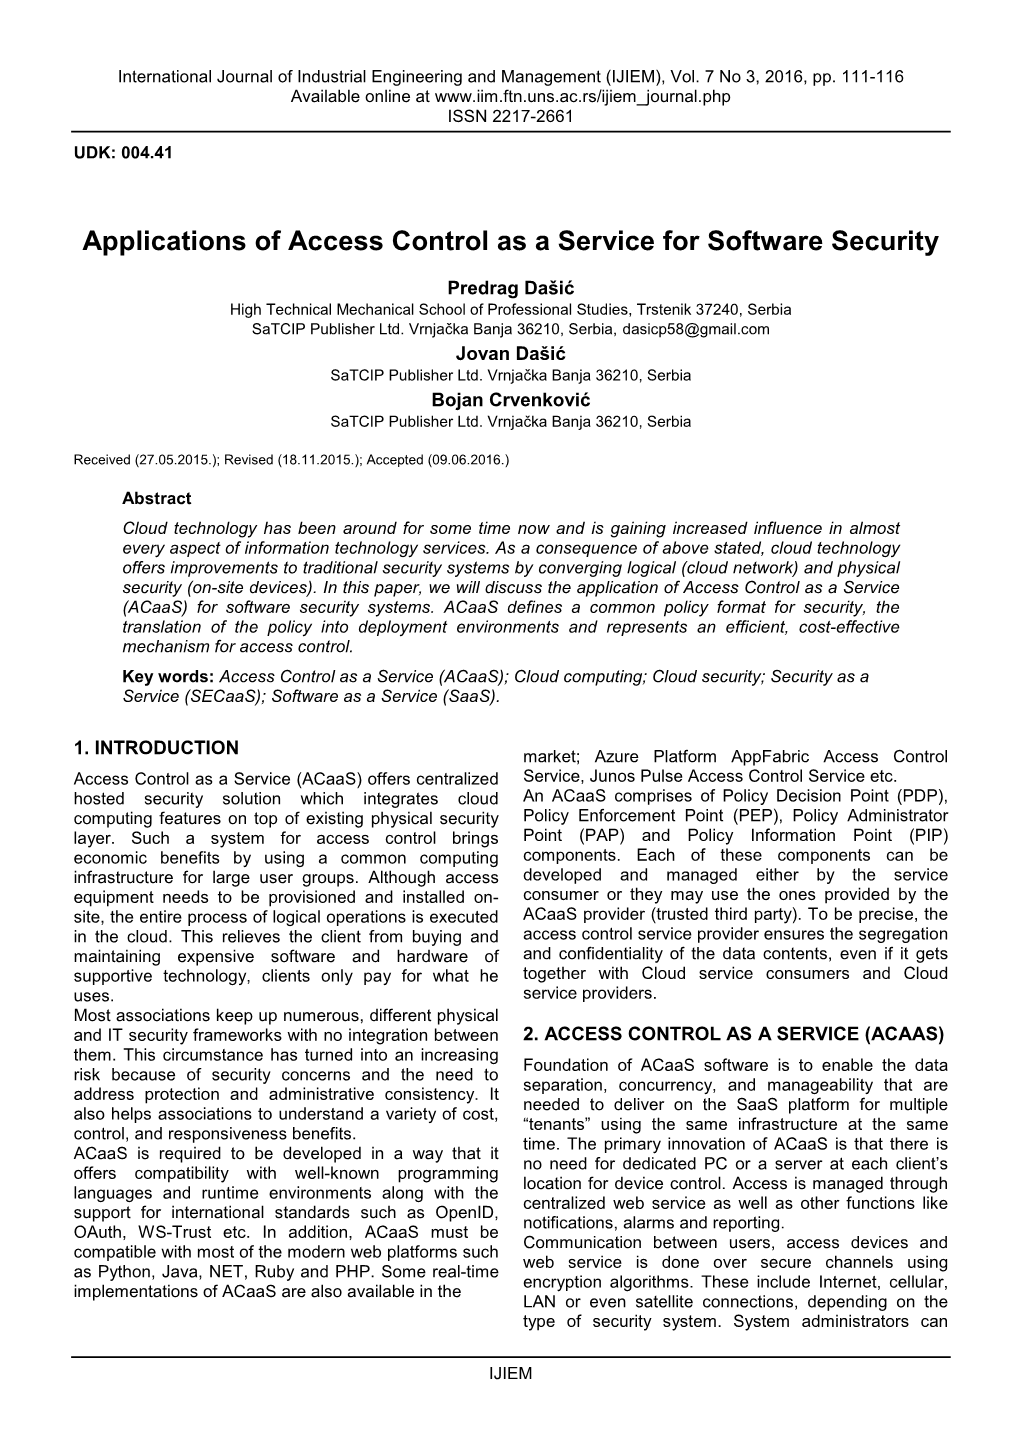 Applications of Access Control As a Service for Software Security